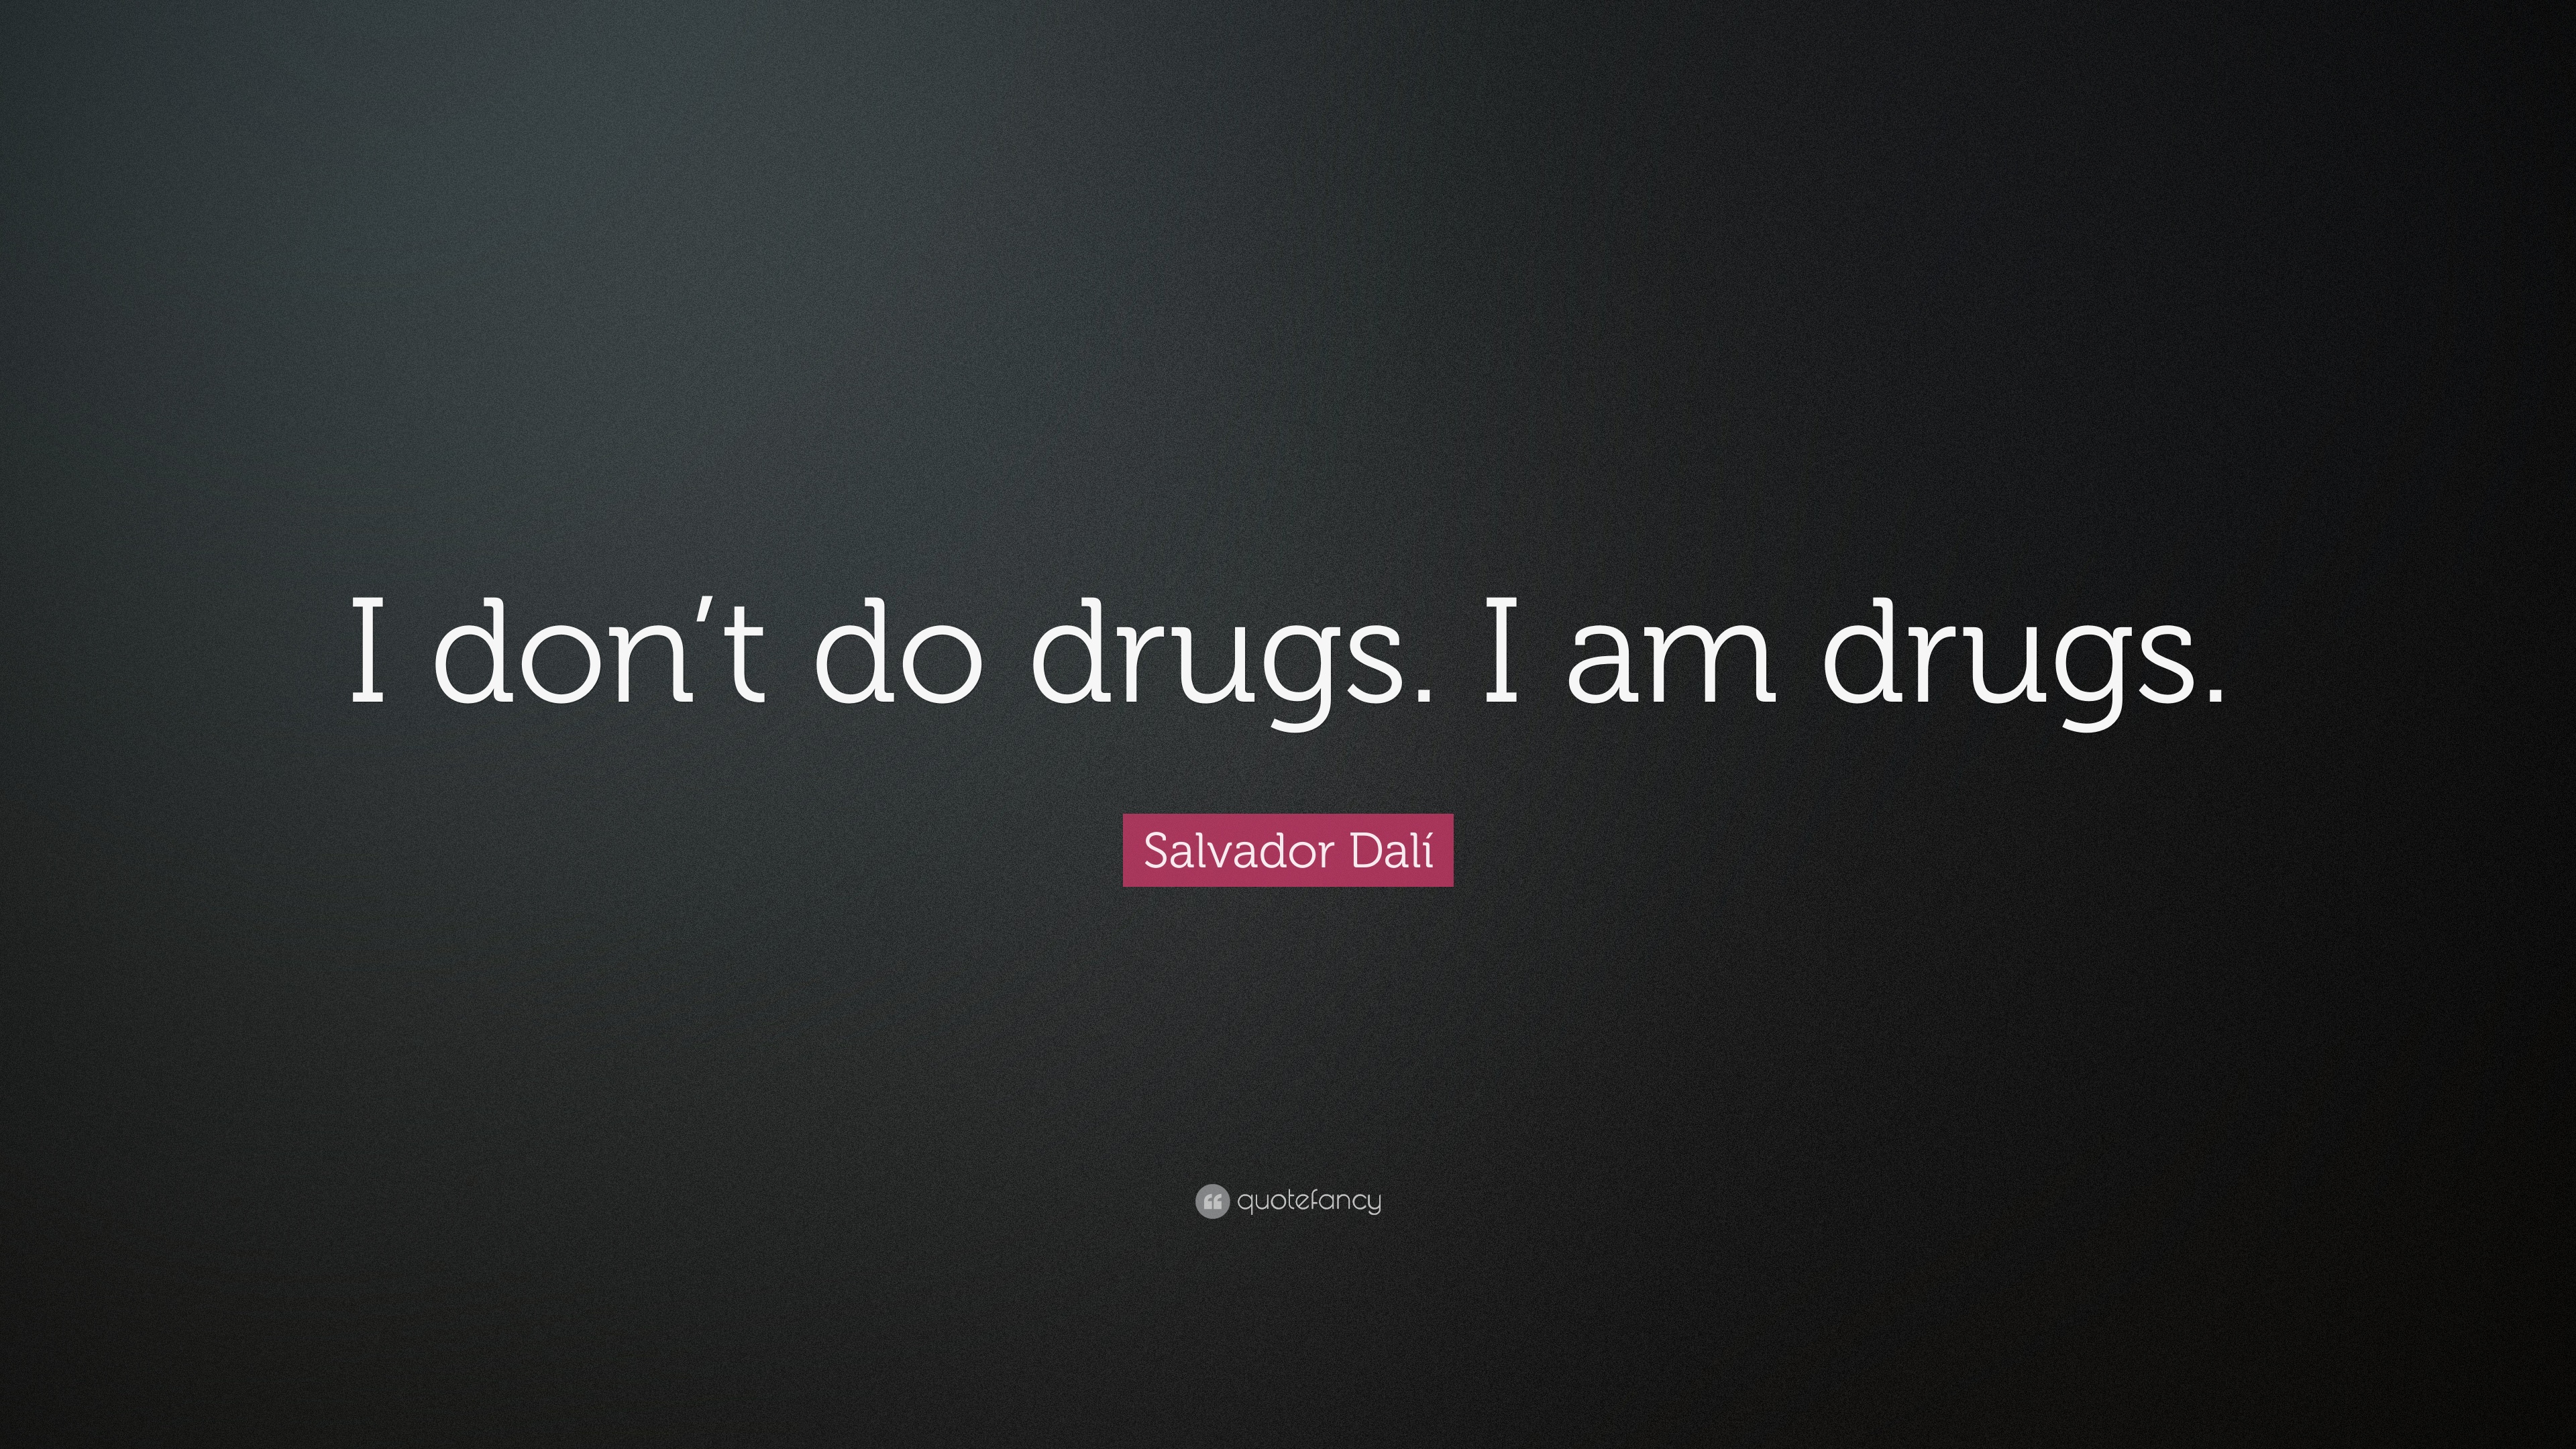 Salvador Dalí Quote - Precaution Is Better Than A Cure Quote - HD Wallpaper 